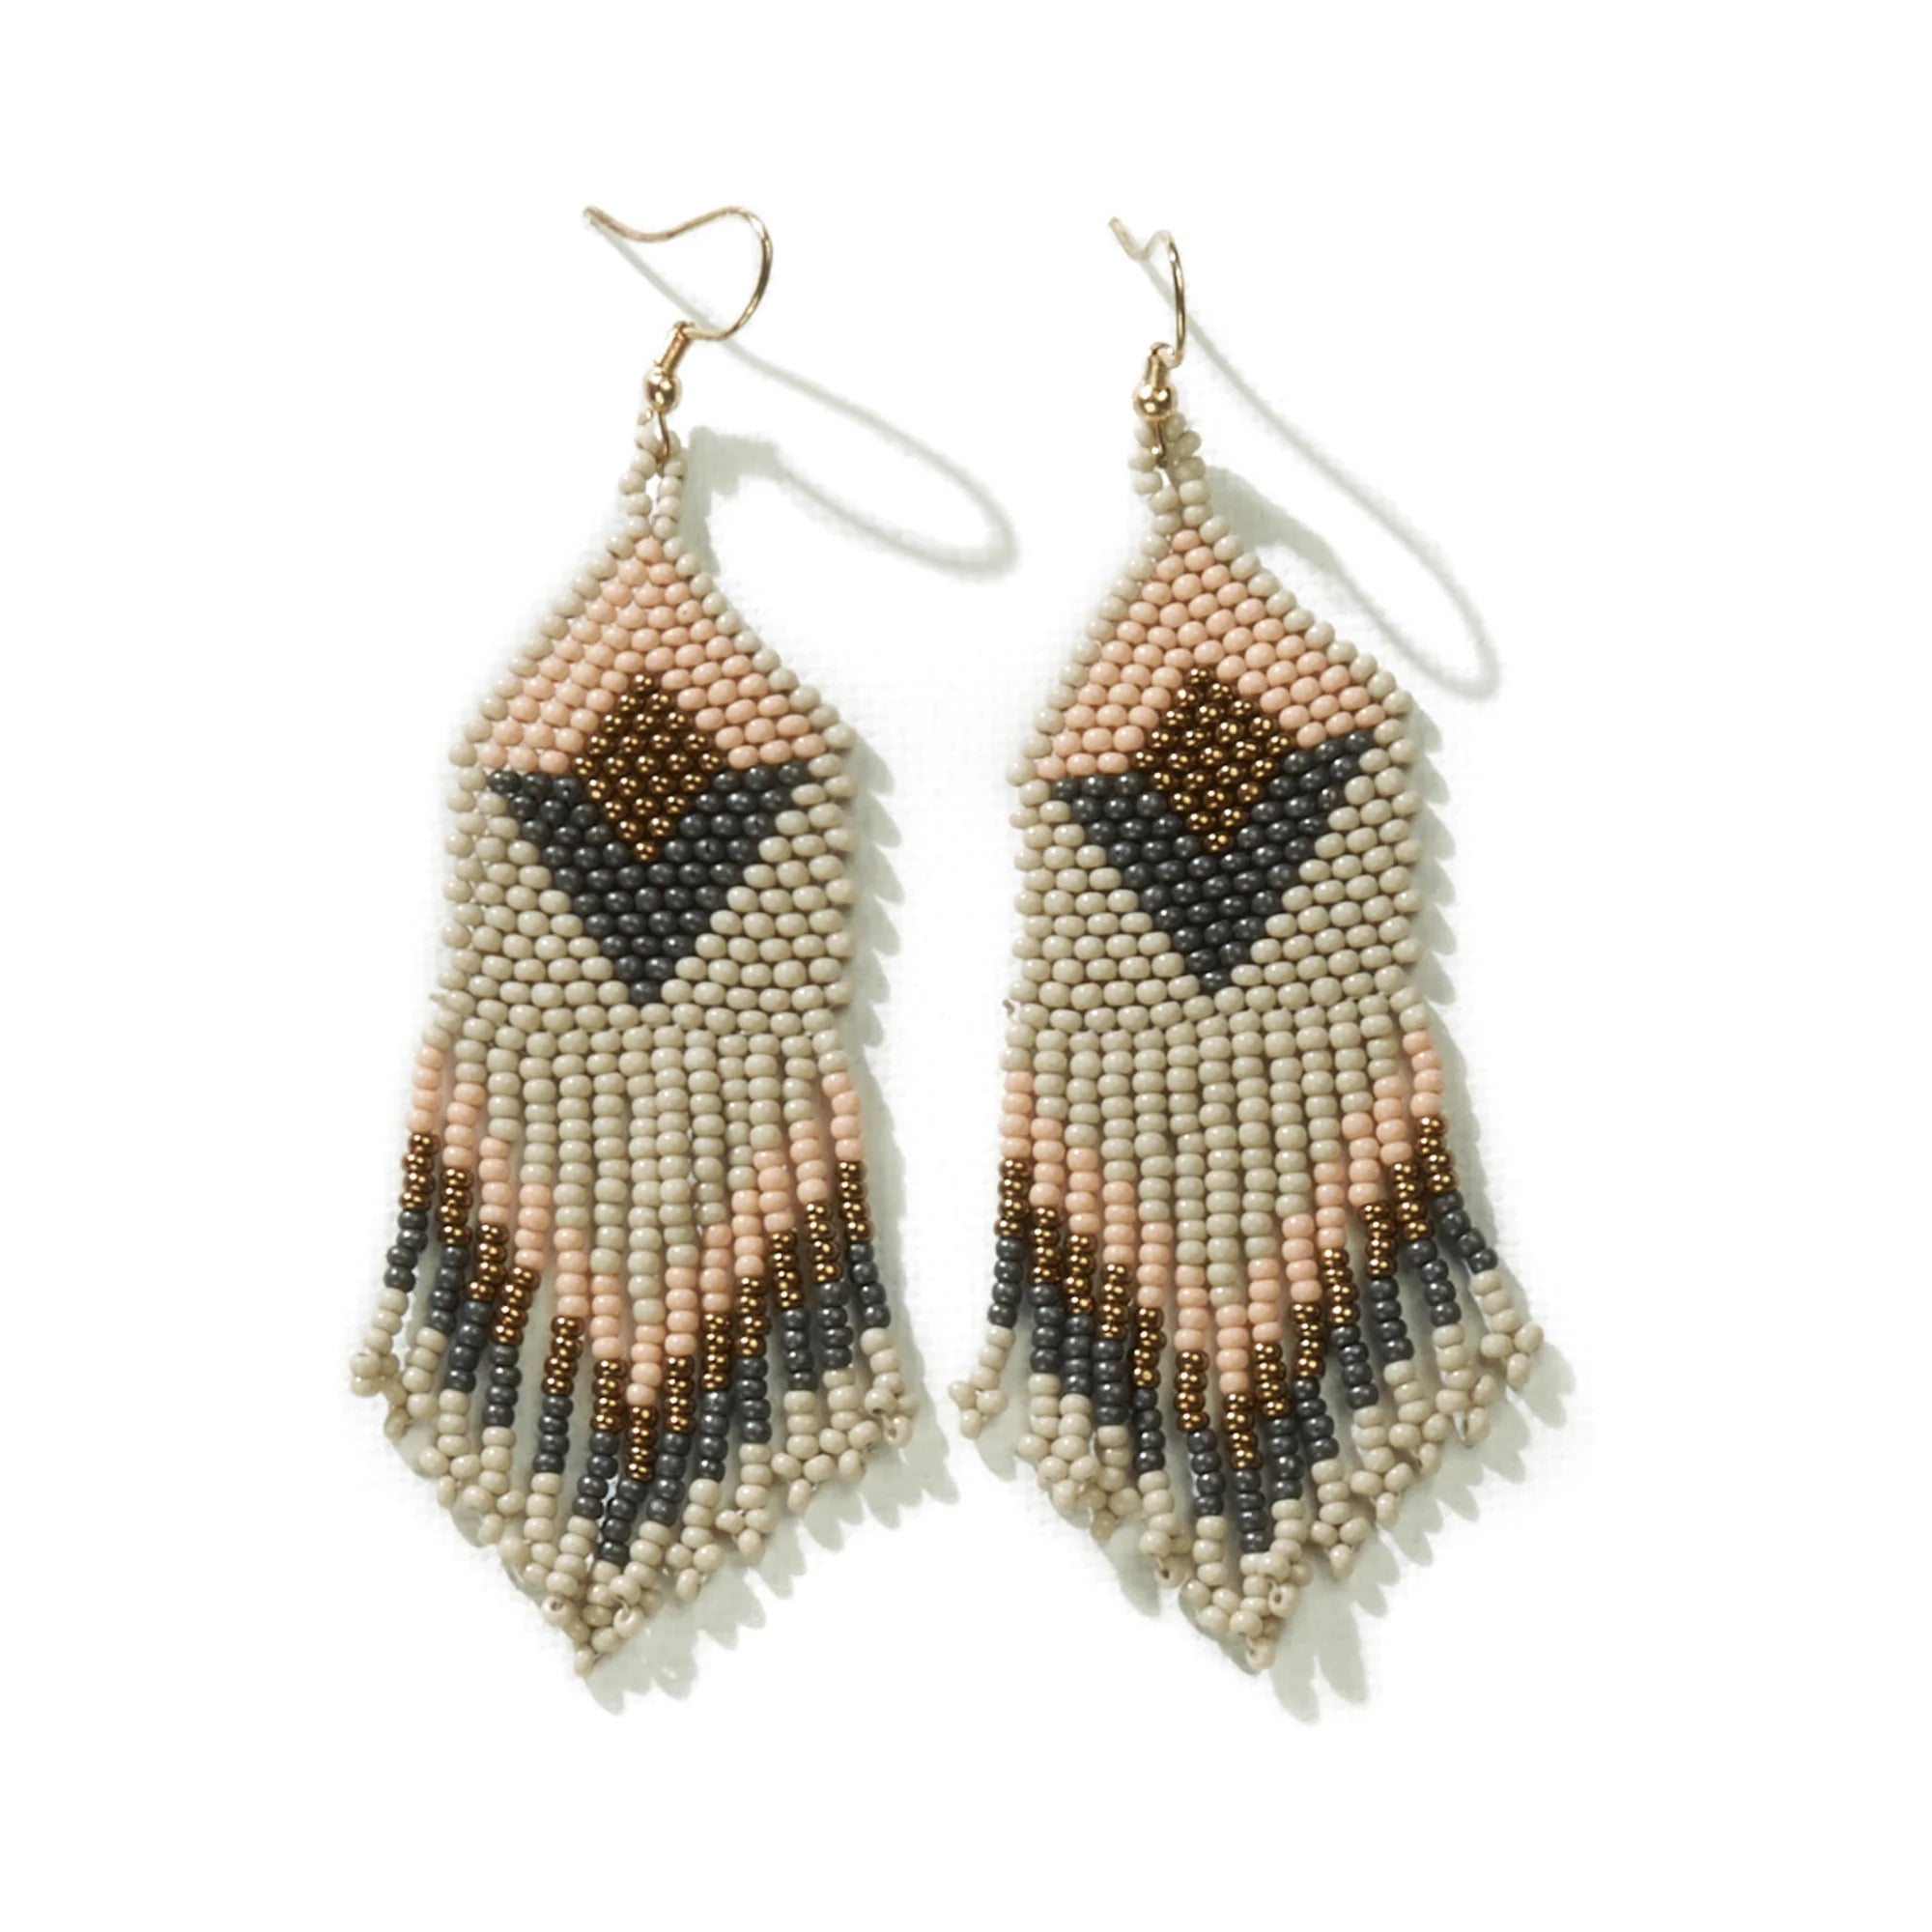 Ink and Alloy Glass beaded earrings